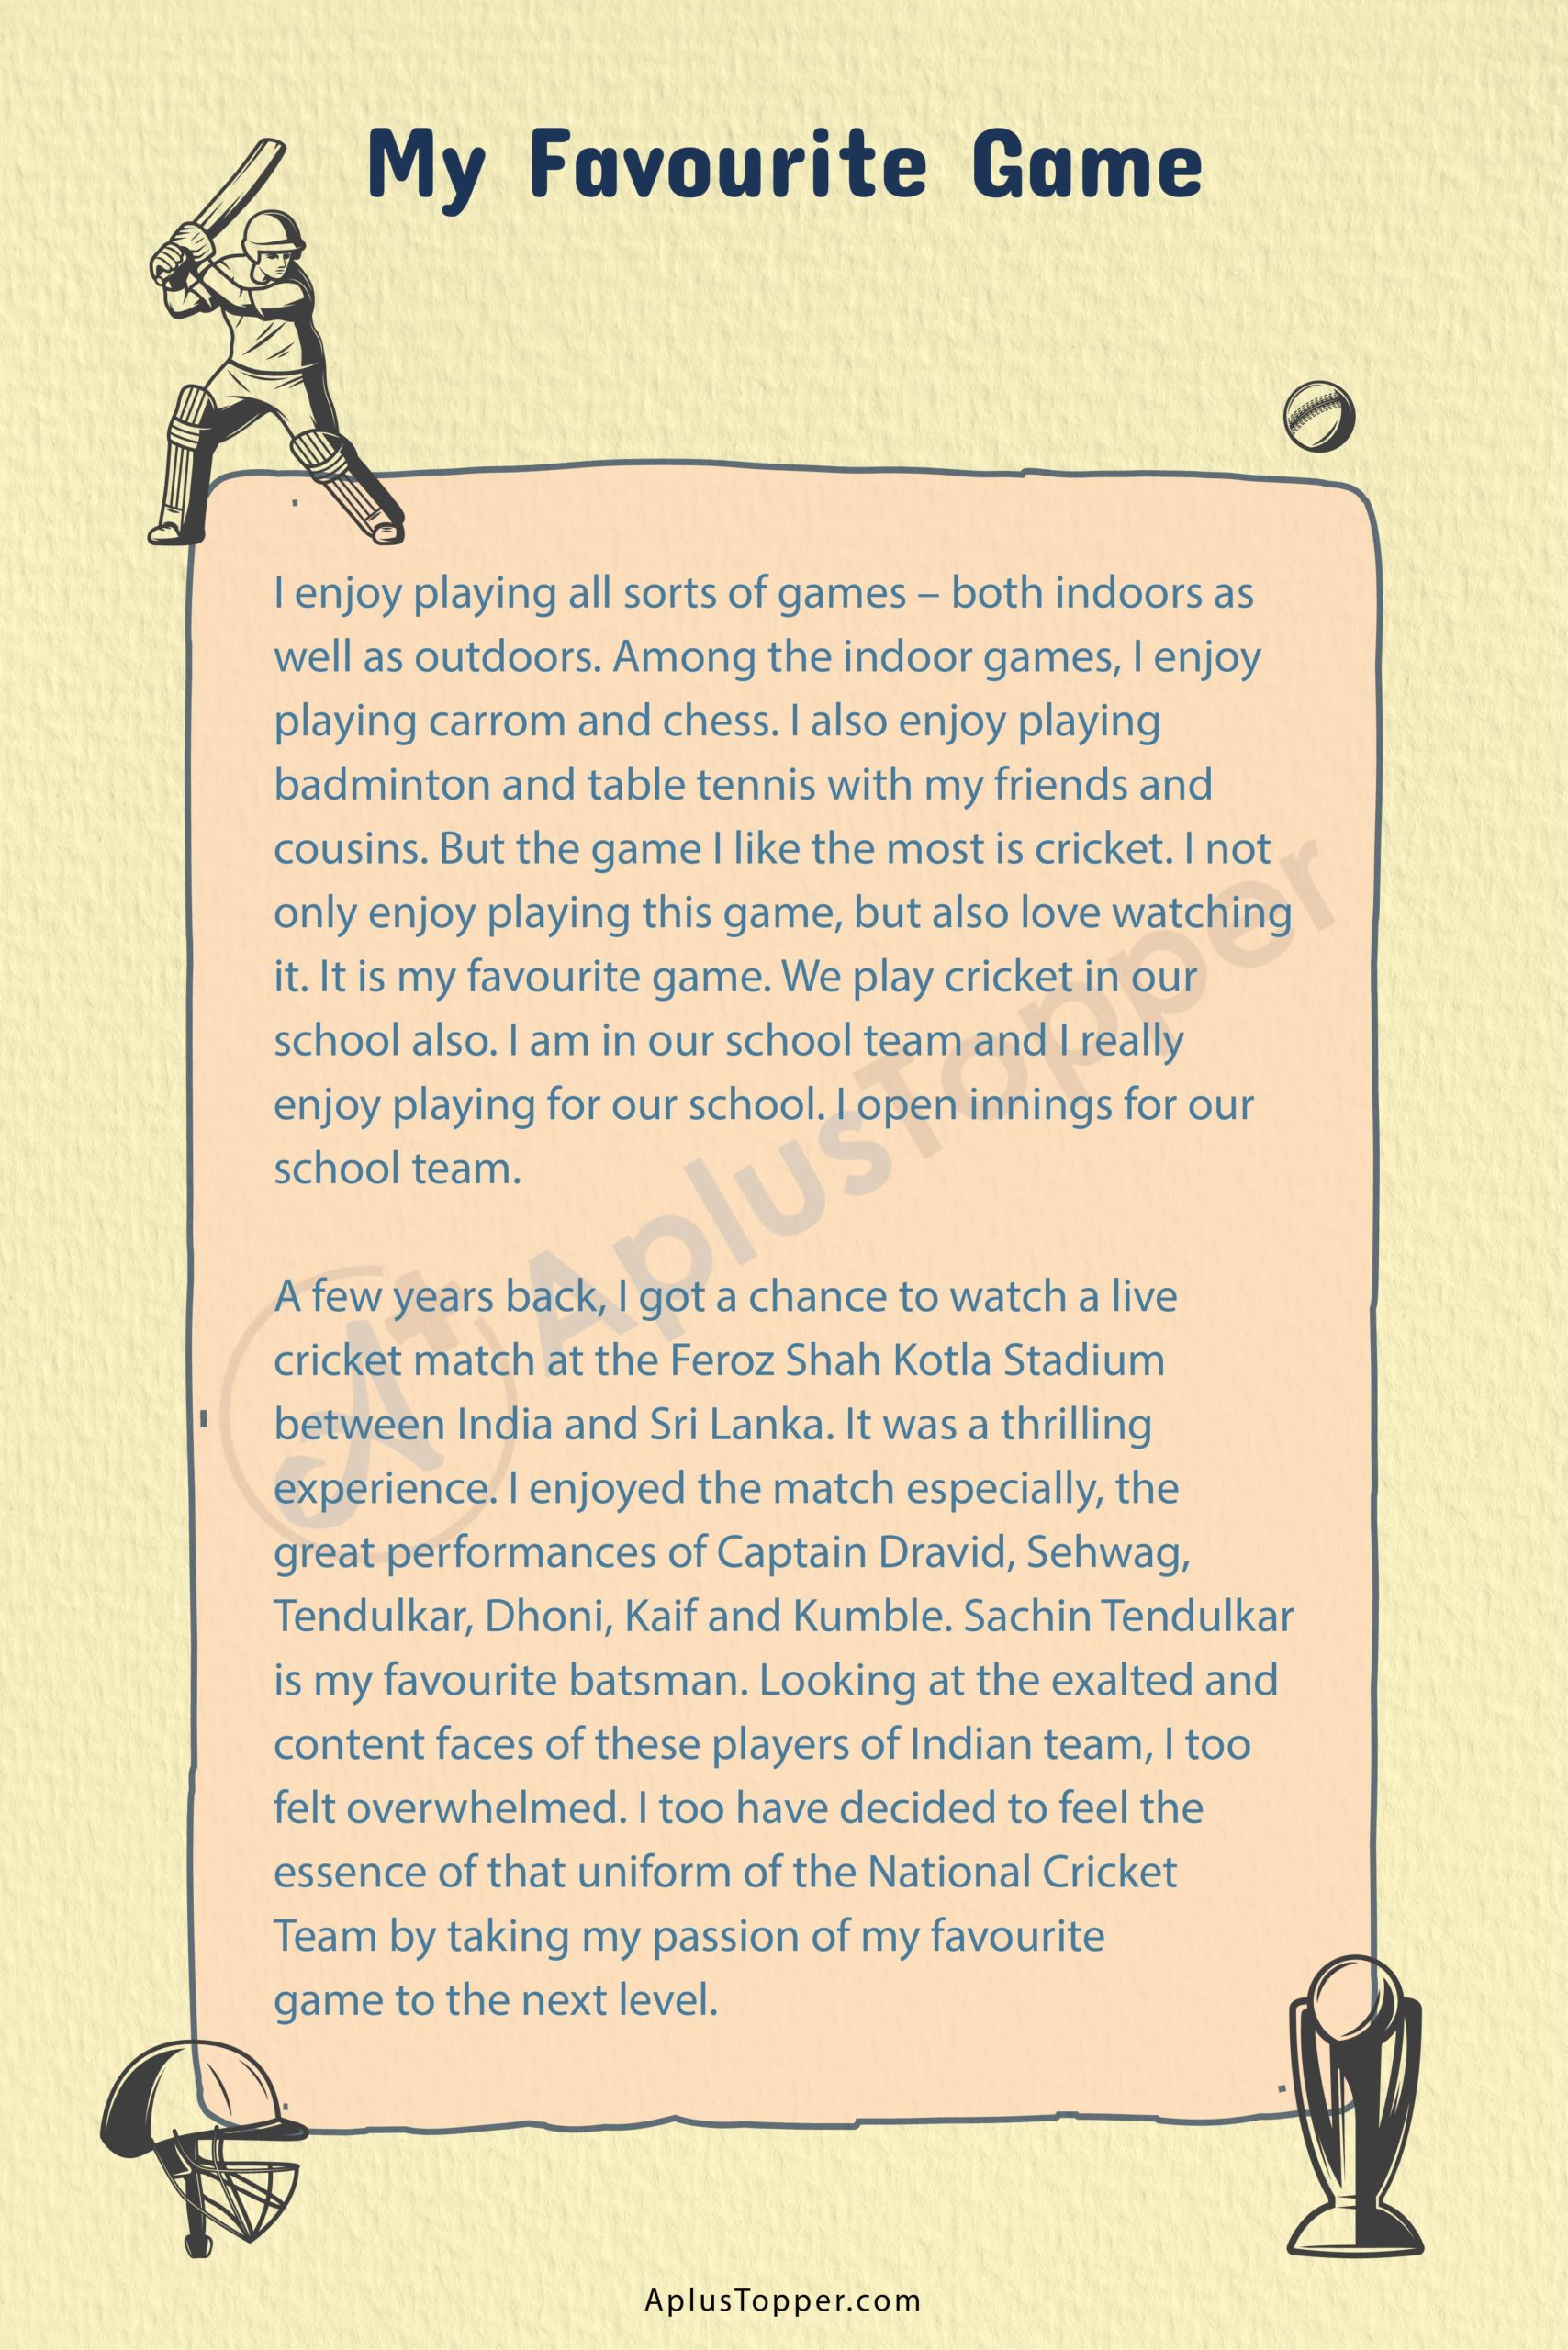 My Favourite Game Essay for Students and Children